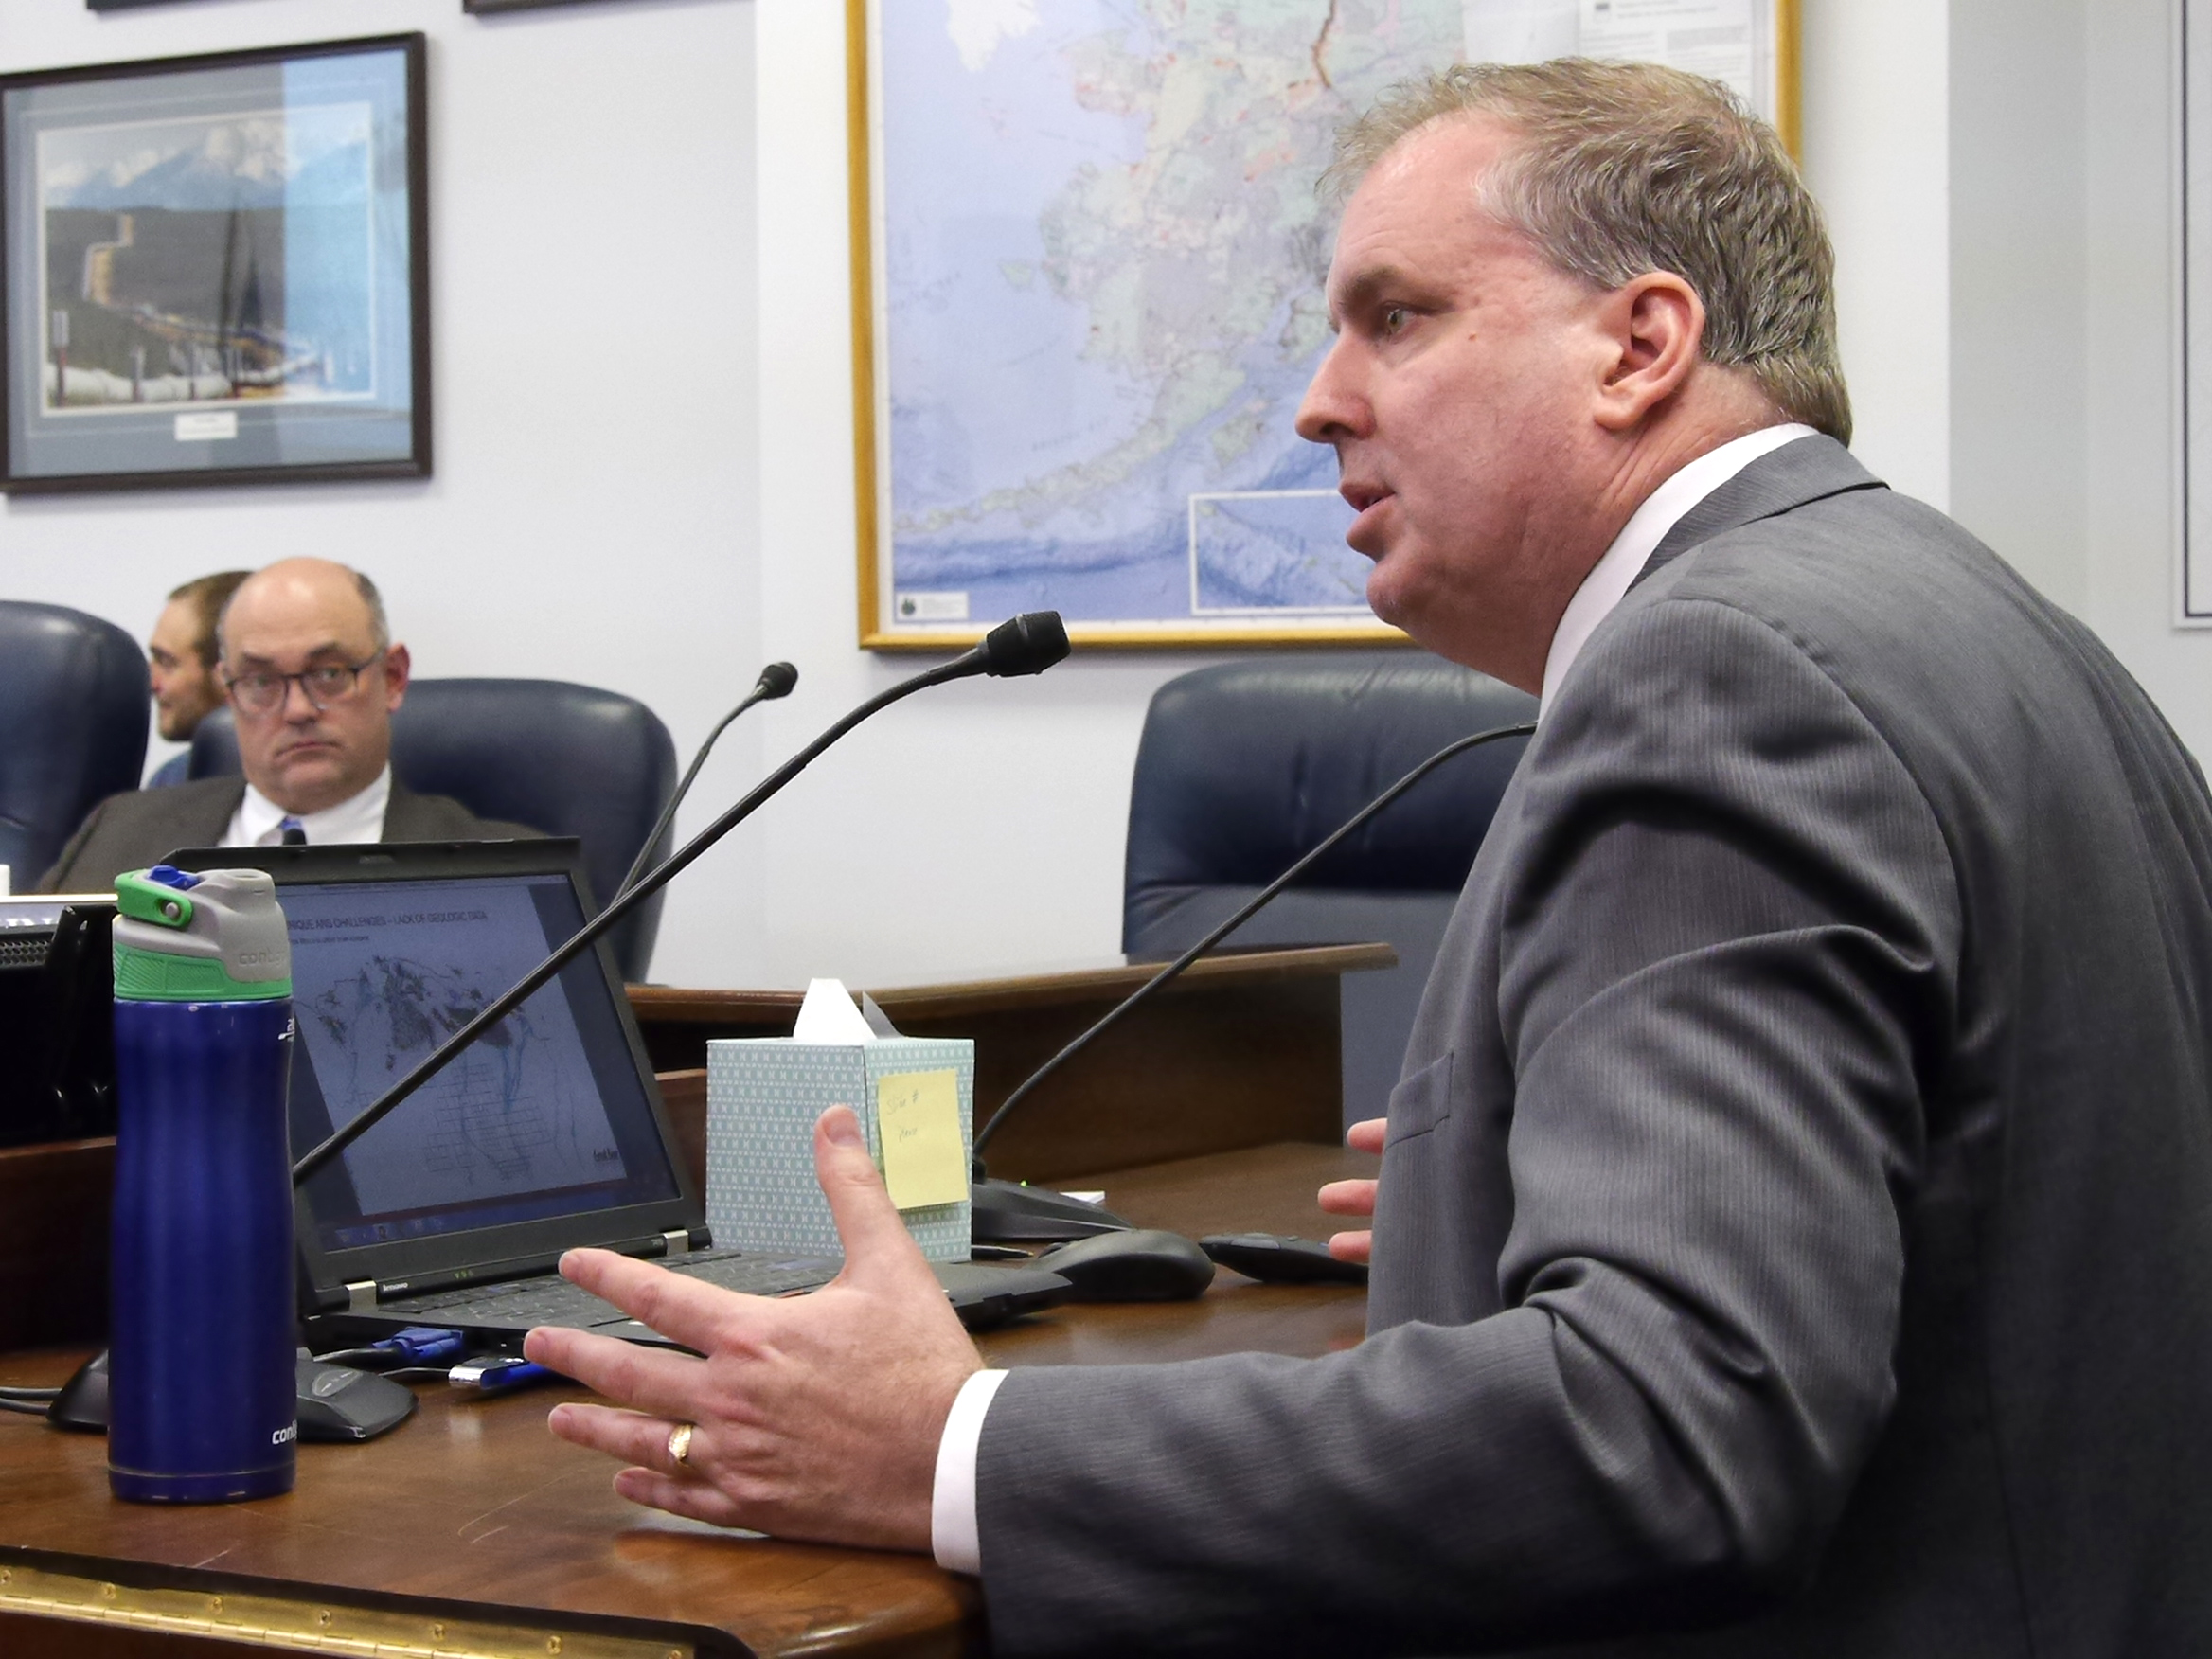 Pat Galvin, Chief Commercial Officer, Great Bear Petroleum, testifies at a House Resources Committee hearing, Feb. 29, 2016. The committee was taking testimony on House Bill 247, which would reduce the tax credits available to oil and gas companies. (Photo by Skip Gray, 360 North)